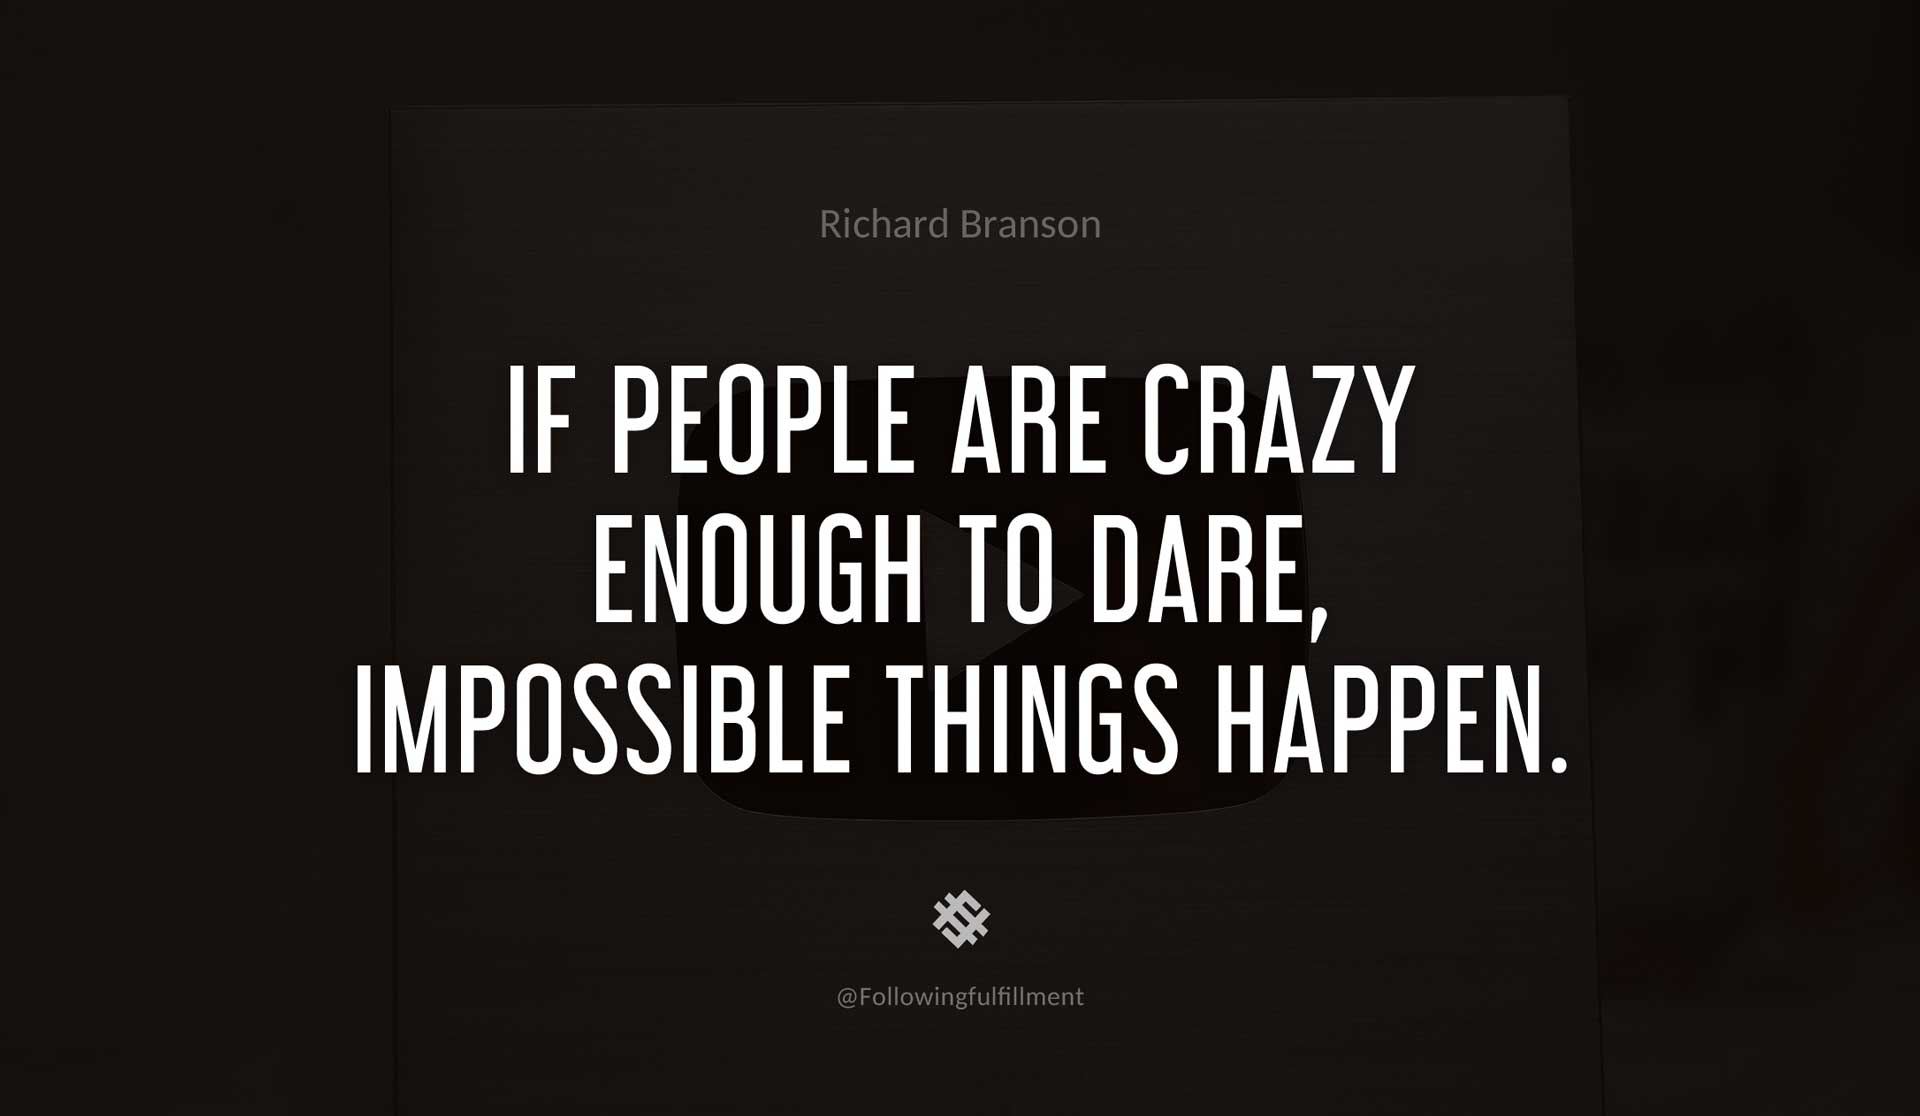 If-people-are-crazy-enough-to-dare,-impossible-things-happen.-RICHARD-BRANSON-Quote.jpg